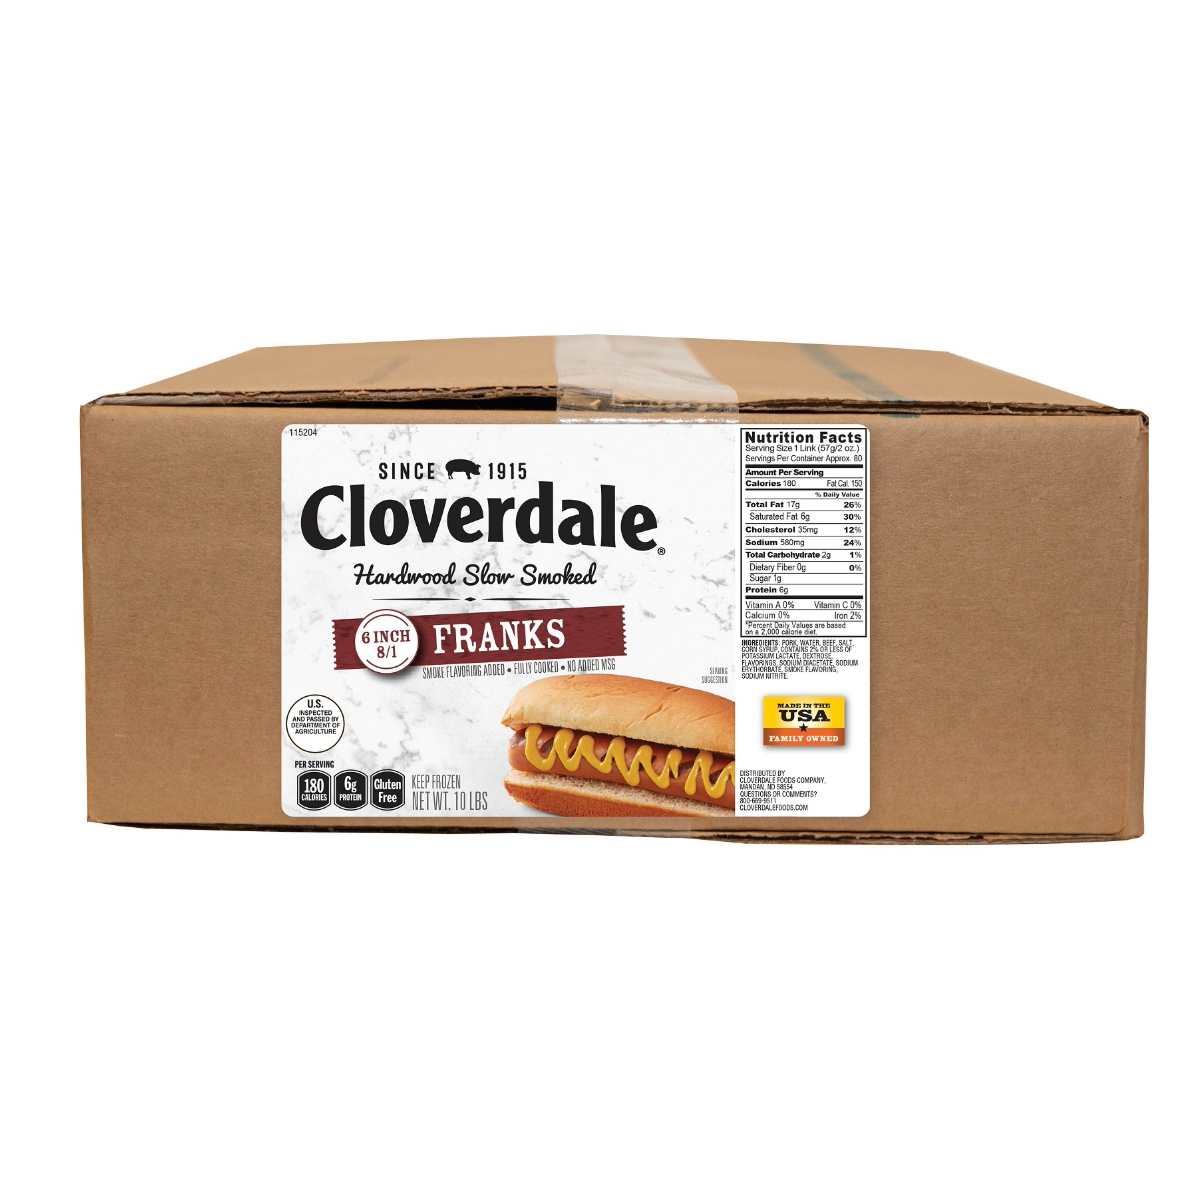 CLOVERDALE MEAT HOT DOGS 6 INCH 8/1 FRANKS